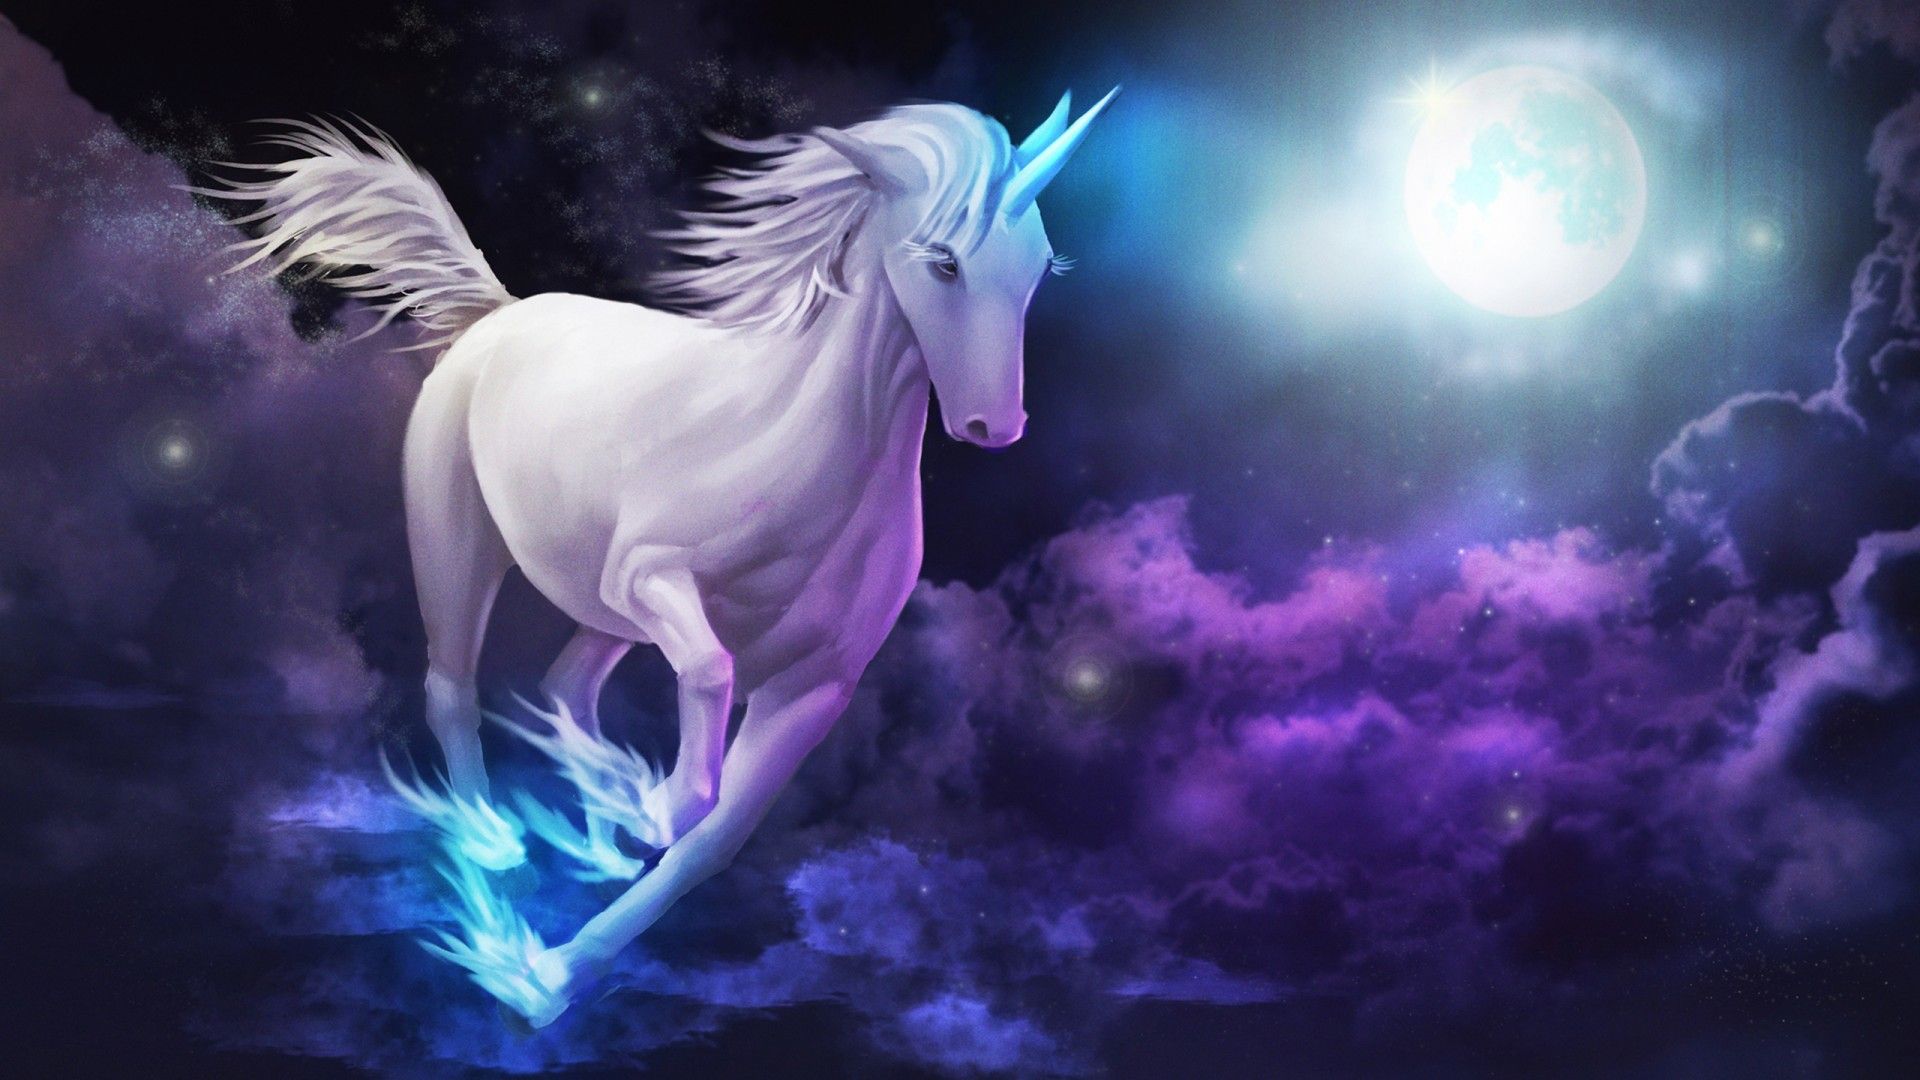 A white unicorn with blue fire hooves - Unicorn